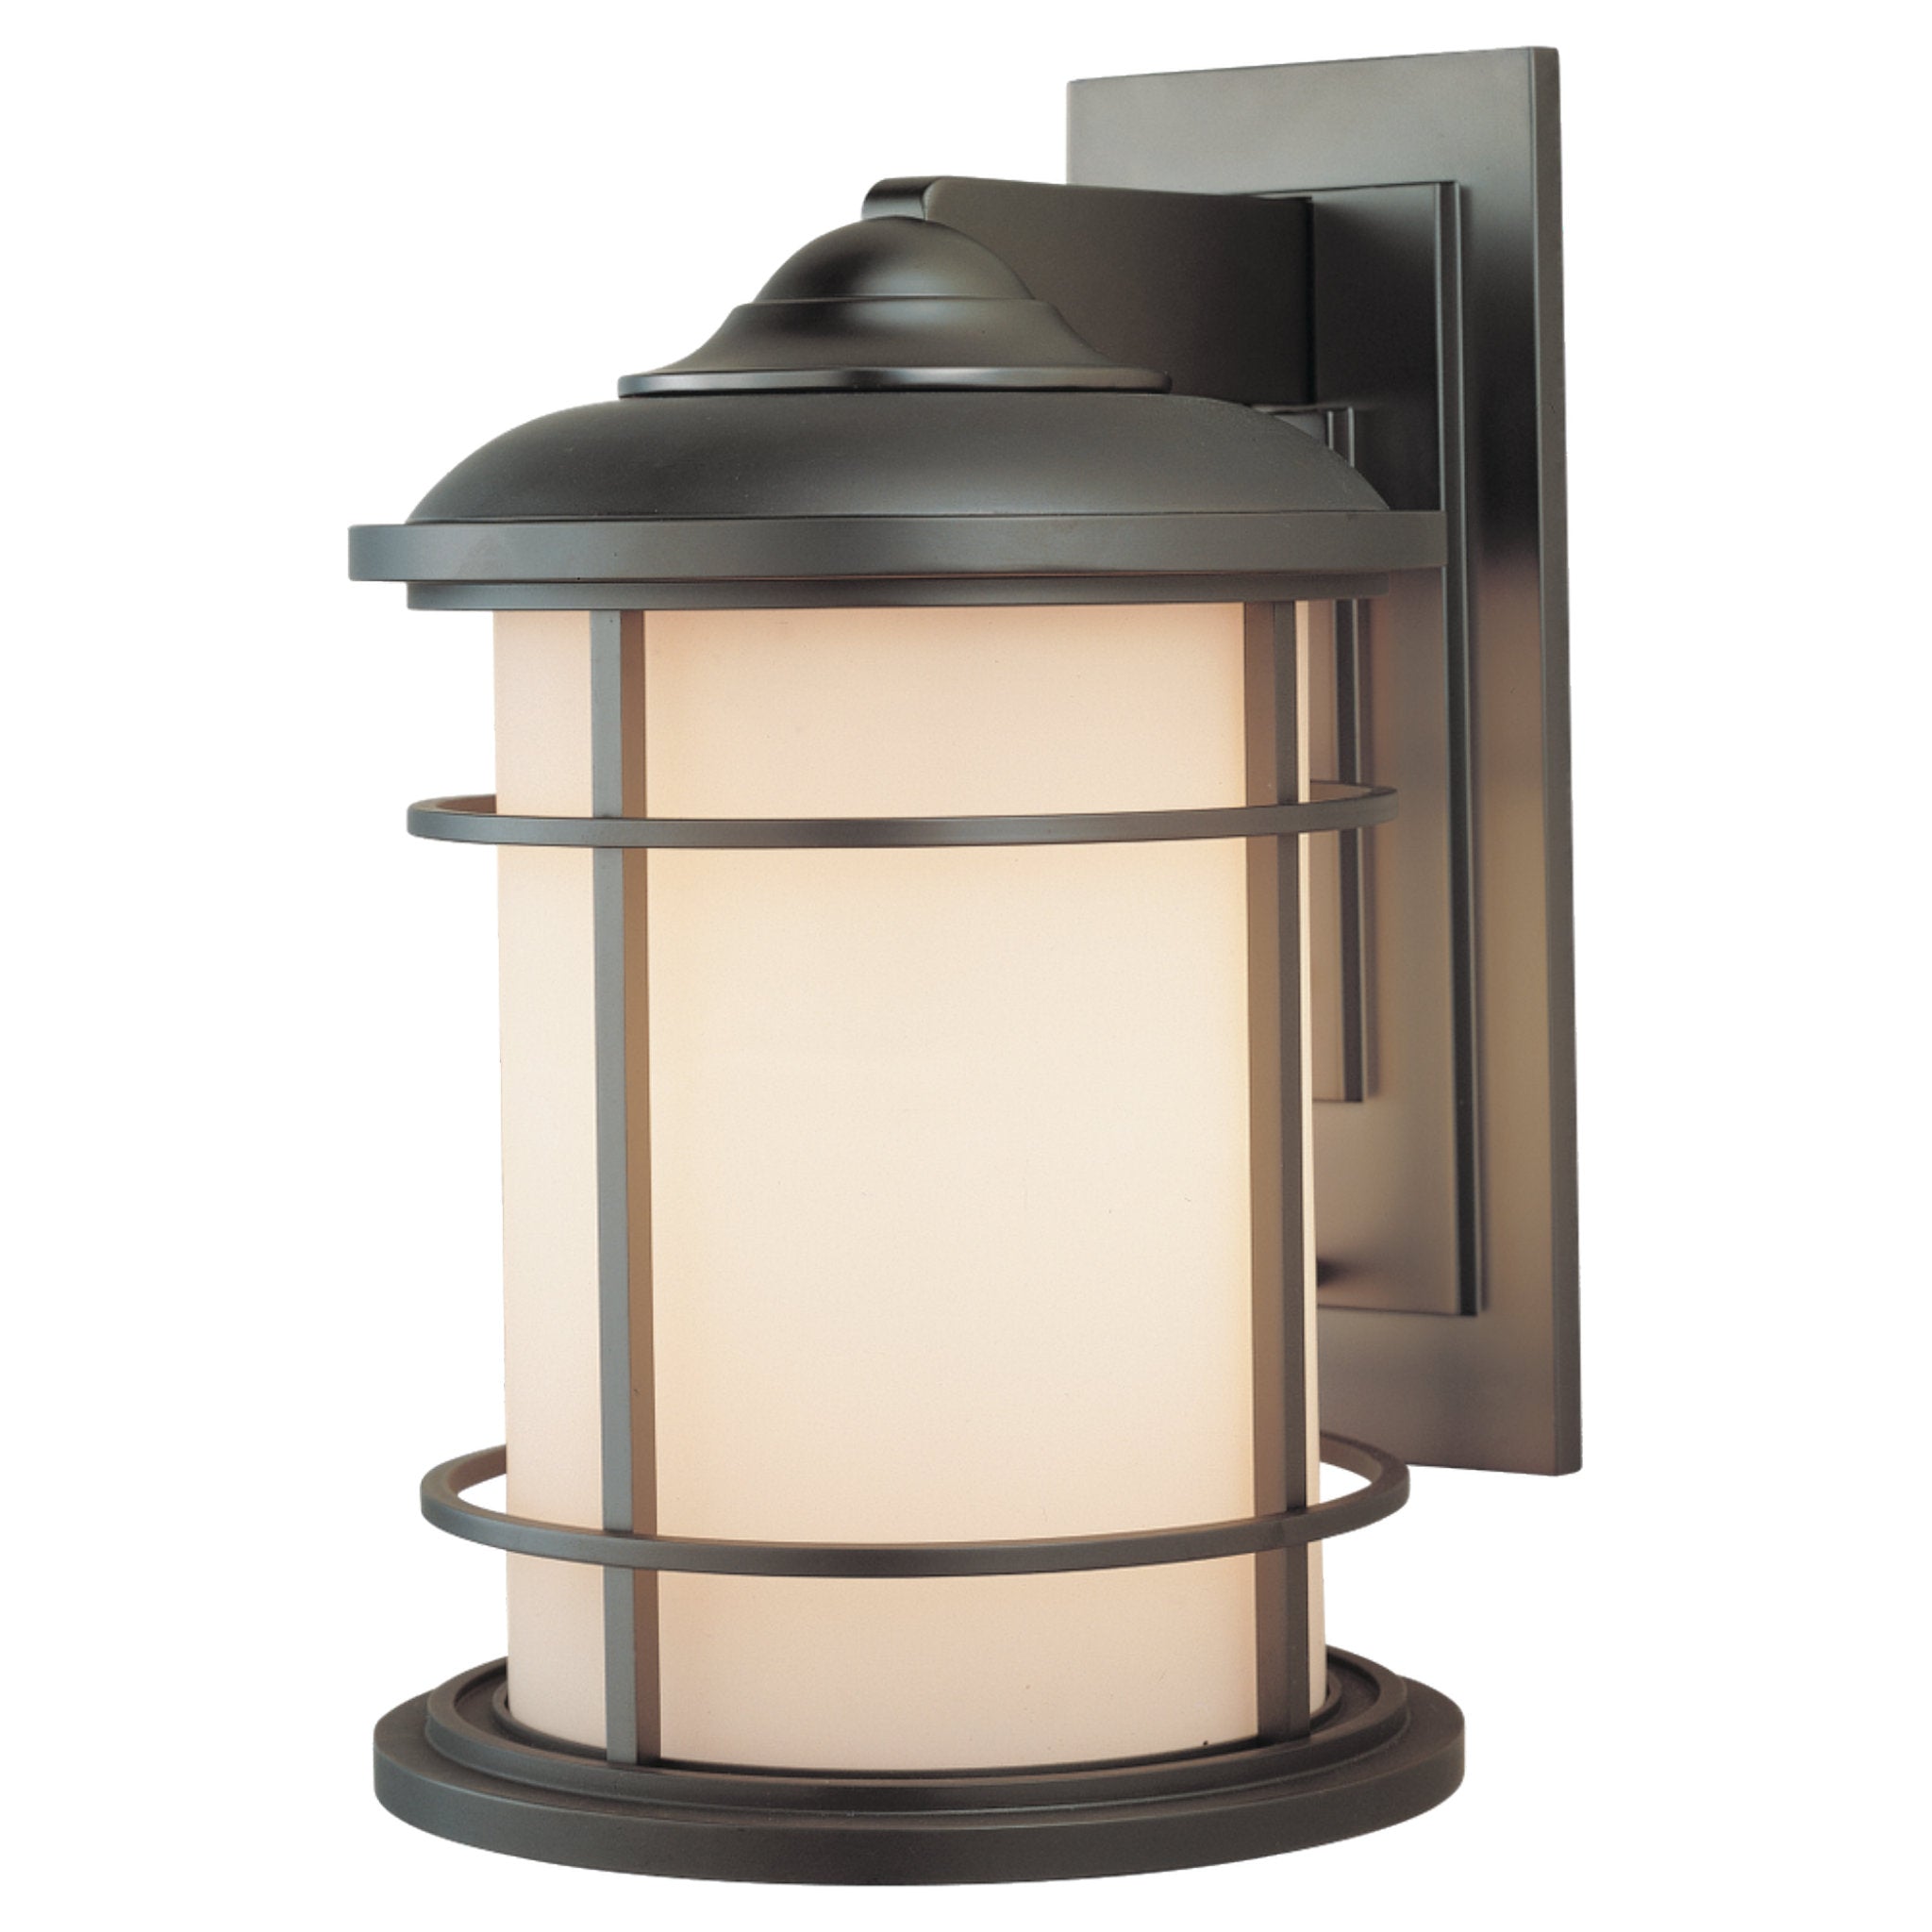 Lighthouse Large Lantern Transitional Outdoor Fixture 9" Width 14.375" Height Aluminum in Burnished Bronze